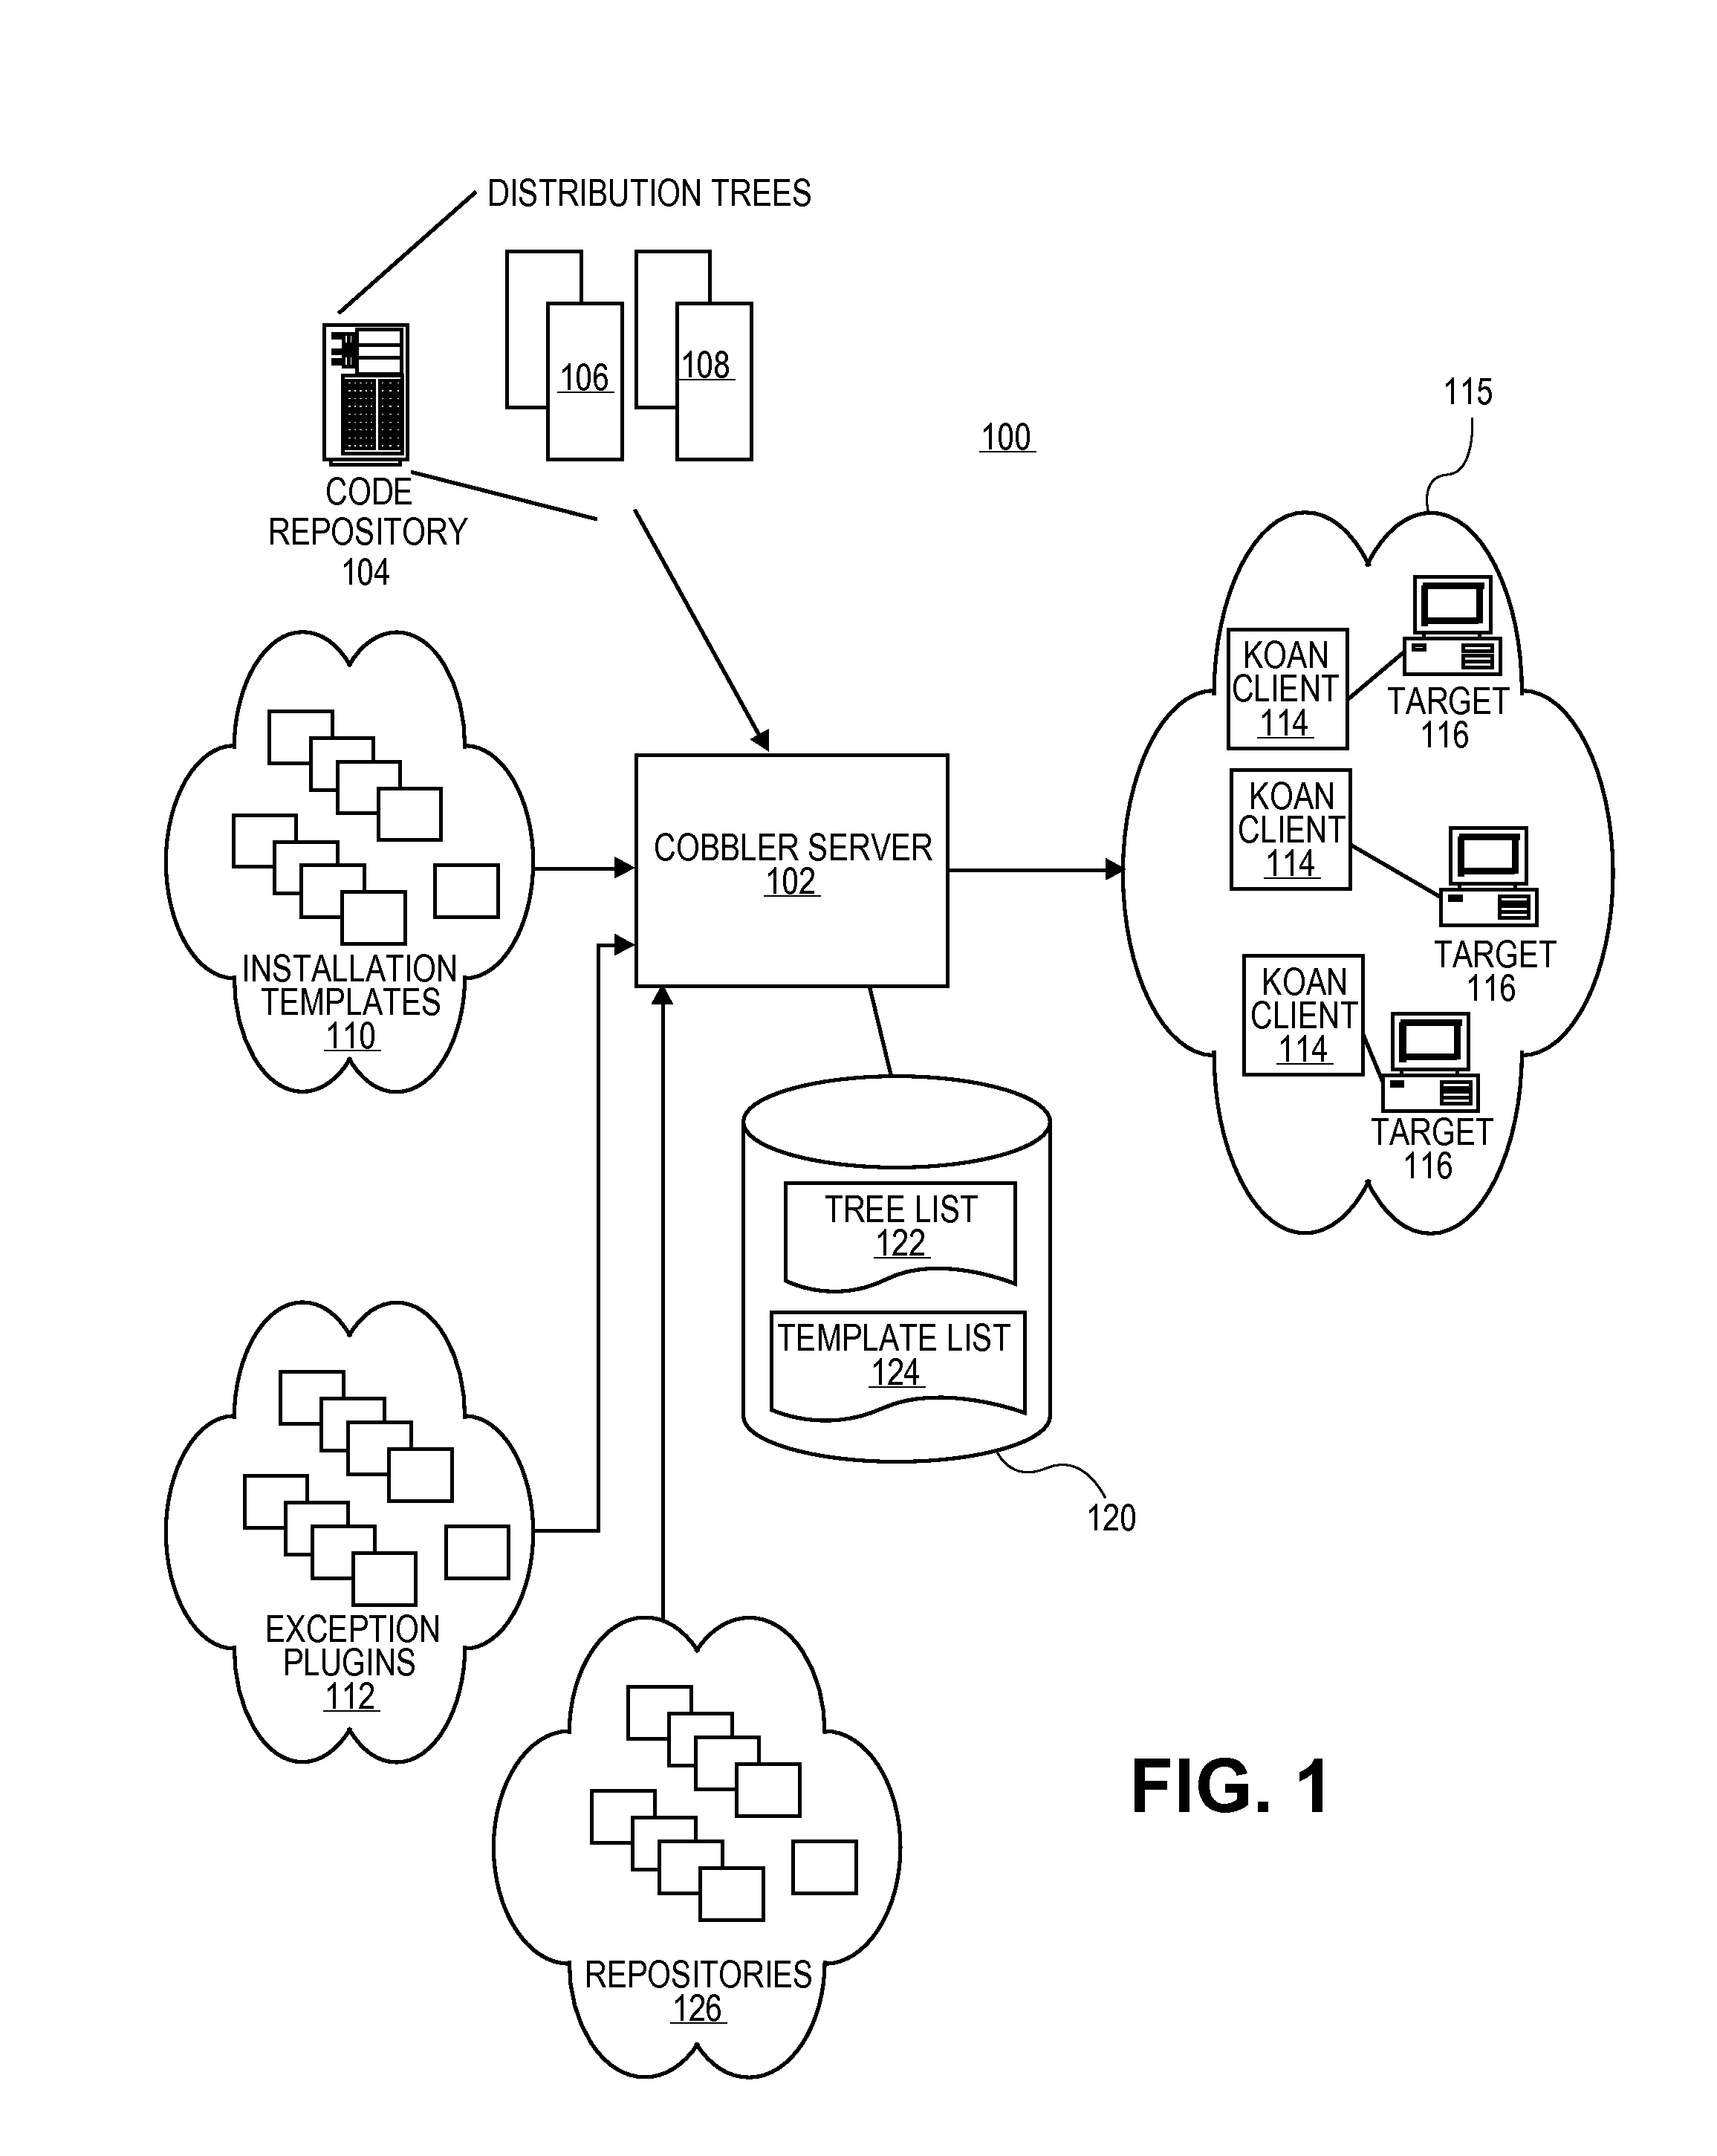 Methods and systems for providing power management services in a software provisioning environment